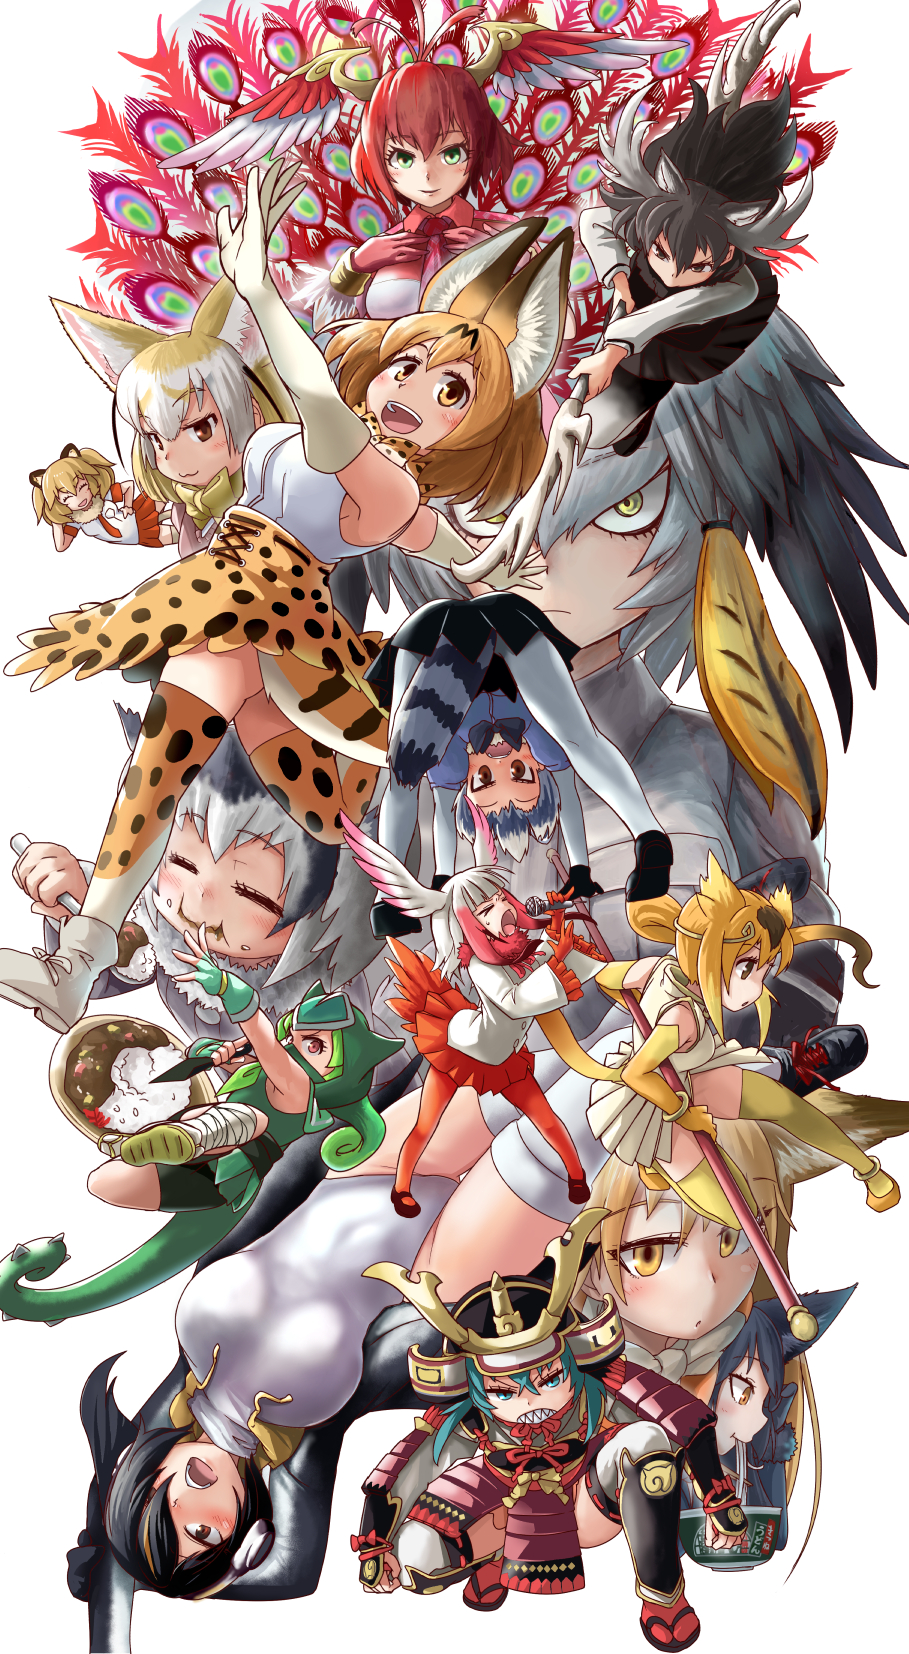 &gt;_&lt; 6+girls :3 :d animal_ear_fluff animal_ears ankle_wrap antlers armor bangs bare_shoulders bird_tail blonde_hair blunt_bangs brown_eyes chameleon_tail circlet clenched_teeth commentary_request common_raccoon_(kemono_friends) curry curry_rice d: doitsuken eating elbow_gloves emperor_penguin_(kemono_friends) extra_ears eyebrows_visible_through_hair ezo_red_fox_(kemono_friends) fennec_(kemono_friends) fingerless_gloves food food_on_face fox_ears frown gloves golden_snub-nosed_monkey_(kemono_friends) green_eyes green_hair grey_hair hair_between_eyes hair_over_one_eye head_wings helmet highres japanese_armor japanese_crested_ibis_(kemono_friends) japari_symbol kabuto kemono_friends kunai leotard lion_(kemono_friends) long_hair looking_through_legs microphone moose_(kemono_friends) multicolored_hair multiple_girls music northern_white-faced_owl_(kemono_friends) open_mouth outstretched_arms panther_chameleon_(kemono_friends) pantyhose peacock_feathers pleated_skirt print_legwear print_skirt raccoon_tail red_gloves red_legwear red_skirt redhead rice serval_(kemono_friends) serval_ears serval_print serval_tail sharp_teeth shirt shoebill_(kemono_friends) short_hair silver_fox_(kemono_friends) simple_background singing skirt smile spoon staff striped_tail suzaku_(kemono_friends) tail teeth thigh-highs tsuchinoko_(kemono_friends) tsurime udon weapon white_background white_hair white_legwear white_leotard white_shirt white_skirt yellow_eyes yellow_gloves yellow_legwear